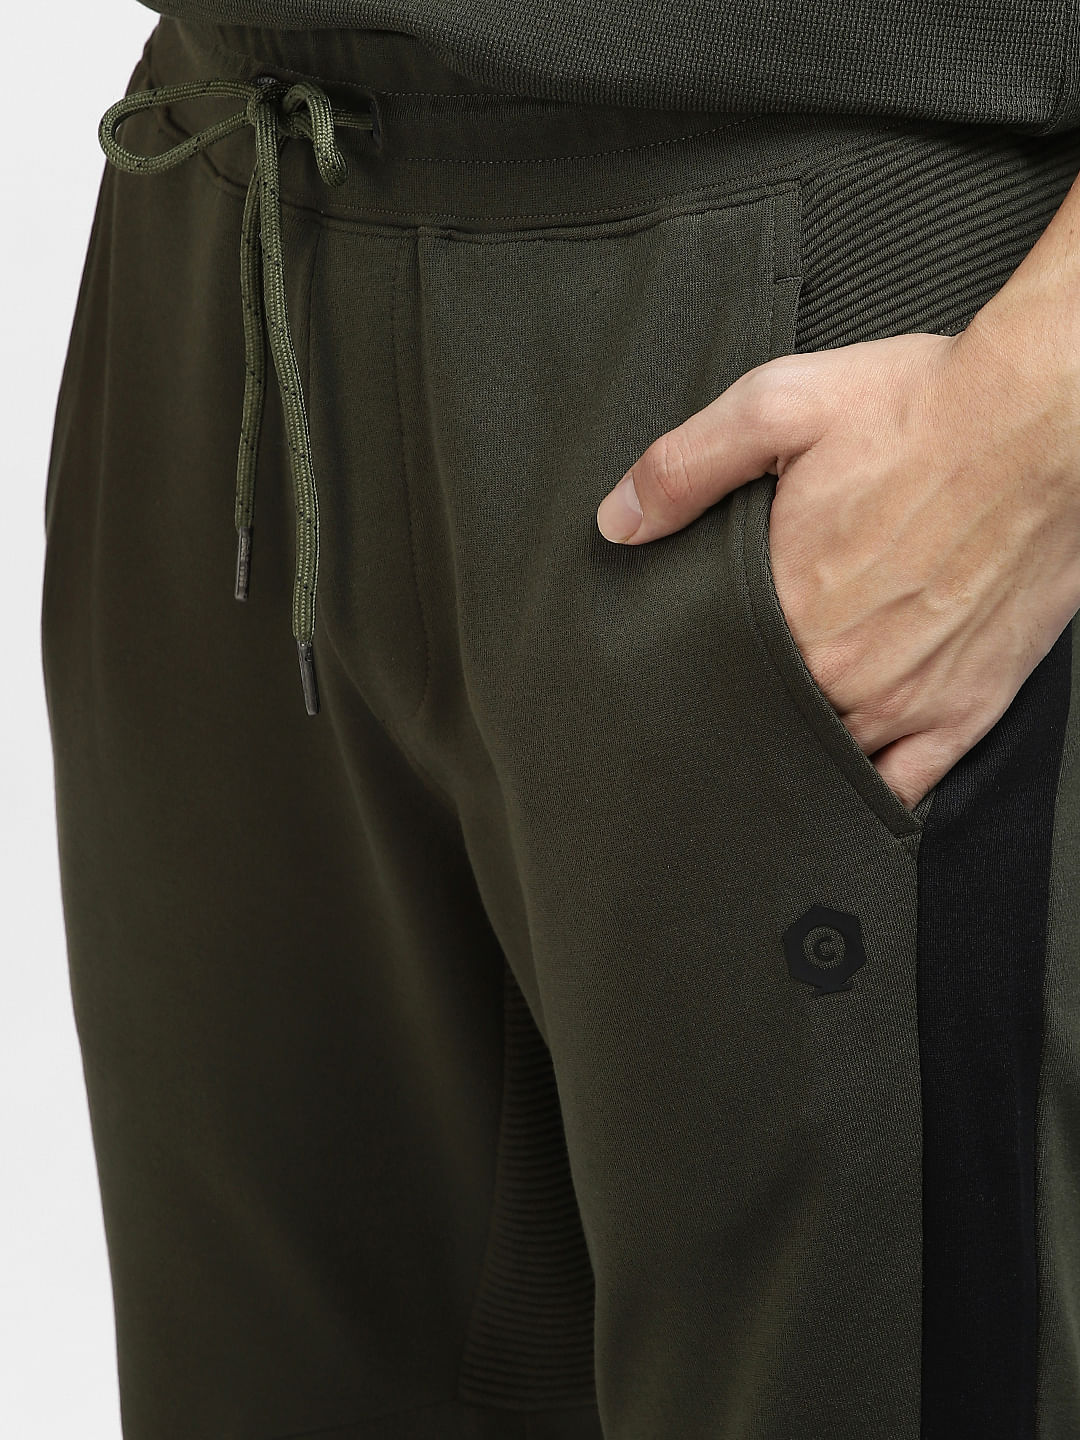 Cotton Green Joggers Olive Green Jogging Pants Green Sweatpants Elastic  Cuff Sweatpants Sustainable Athleisure Comfy Sweatpants - Etsy